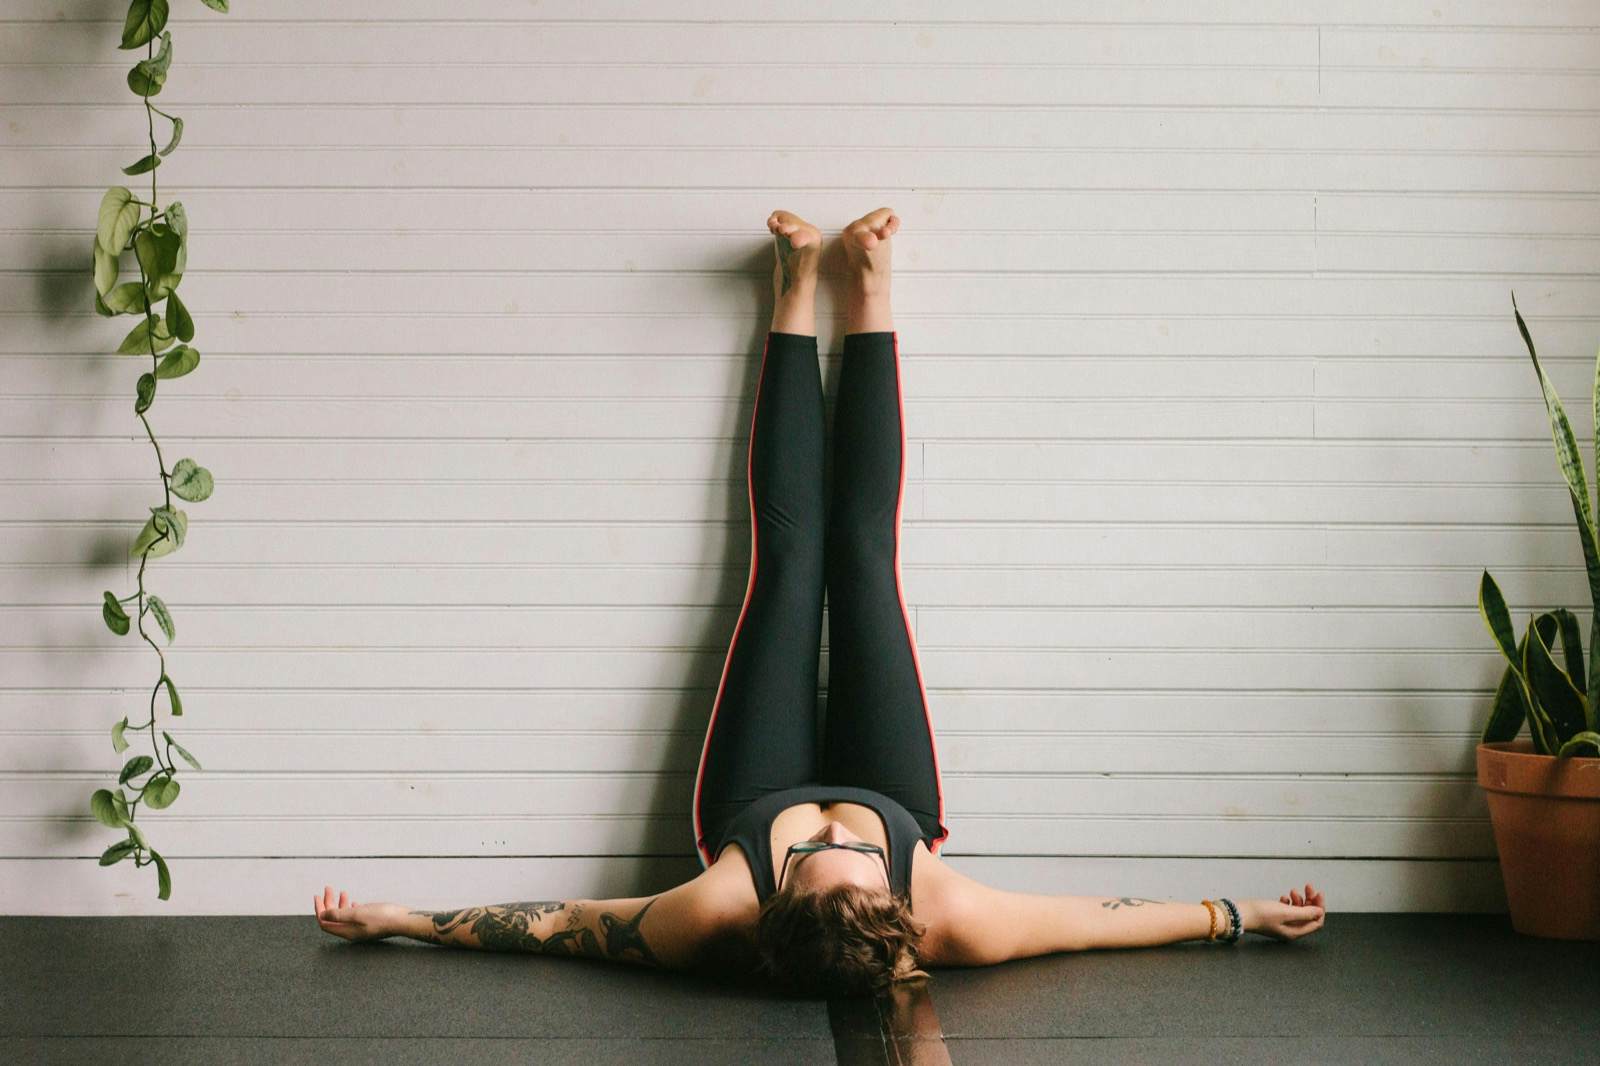 10 Yoga poses to level up your practice - Destiny's Child